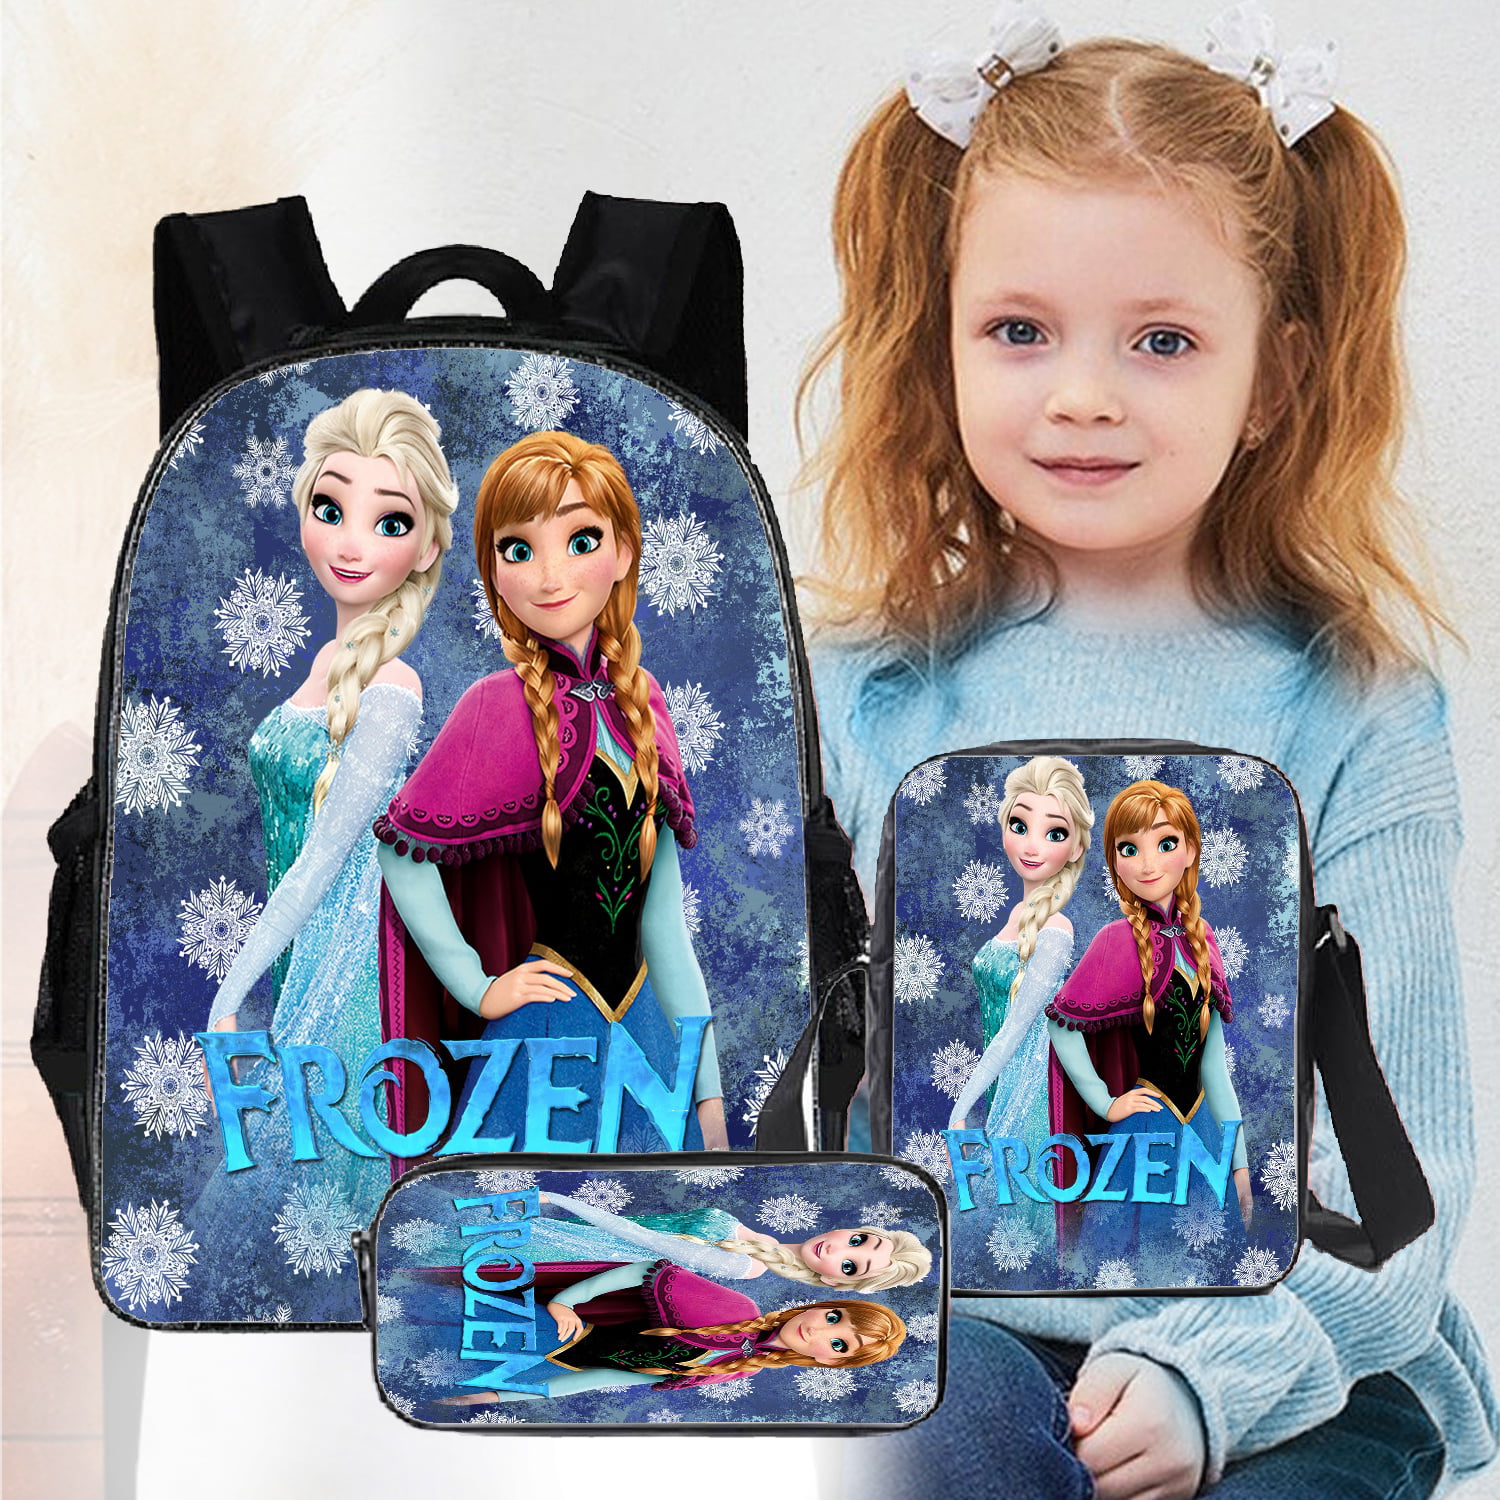 Amazon.com: Disney Frozen 2 Lunch Box with Princesses Elsa and Anna - Soft  Insulated Lunch Bag for Girls, Purple: Home & Kitchen